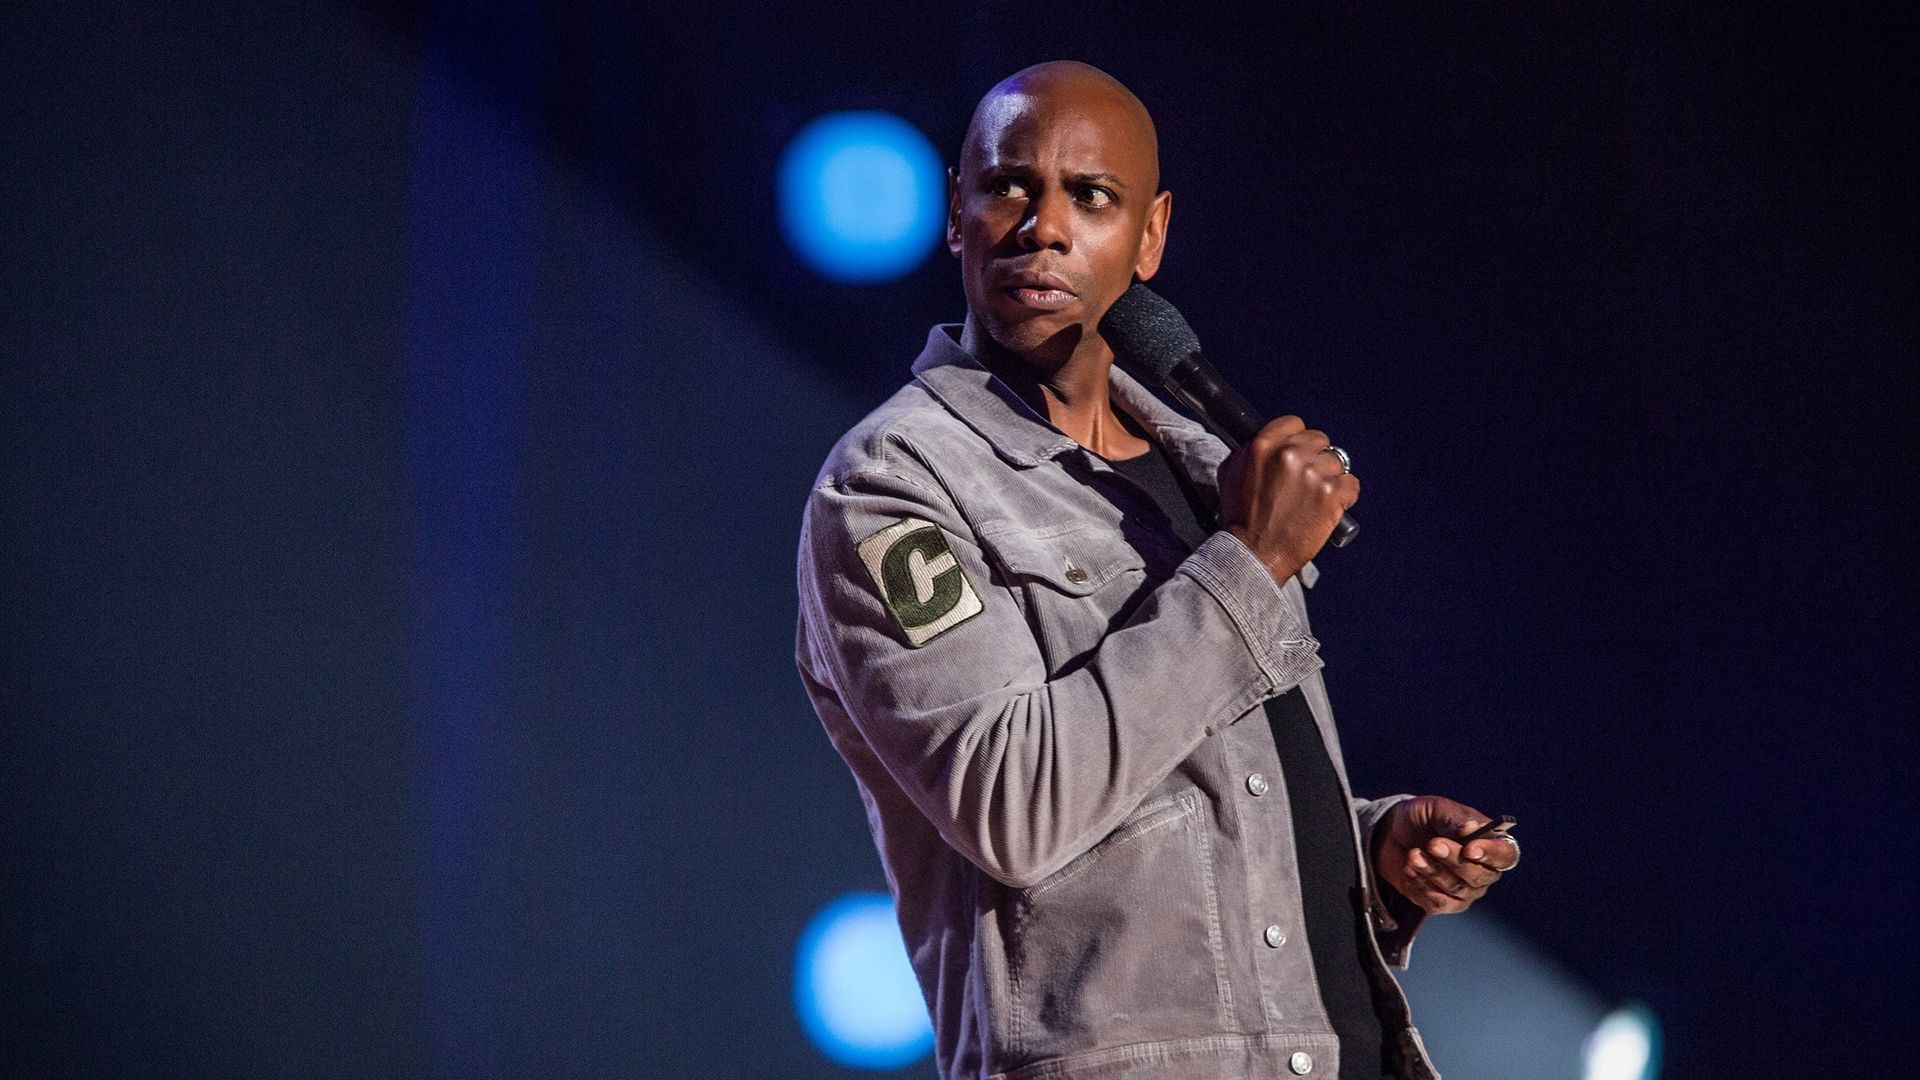 Dave Chappelle: Equanimity background